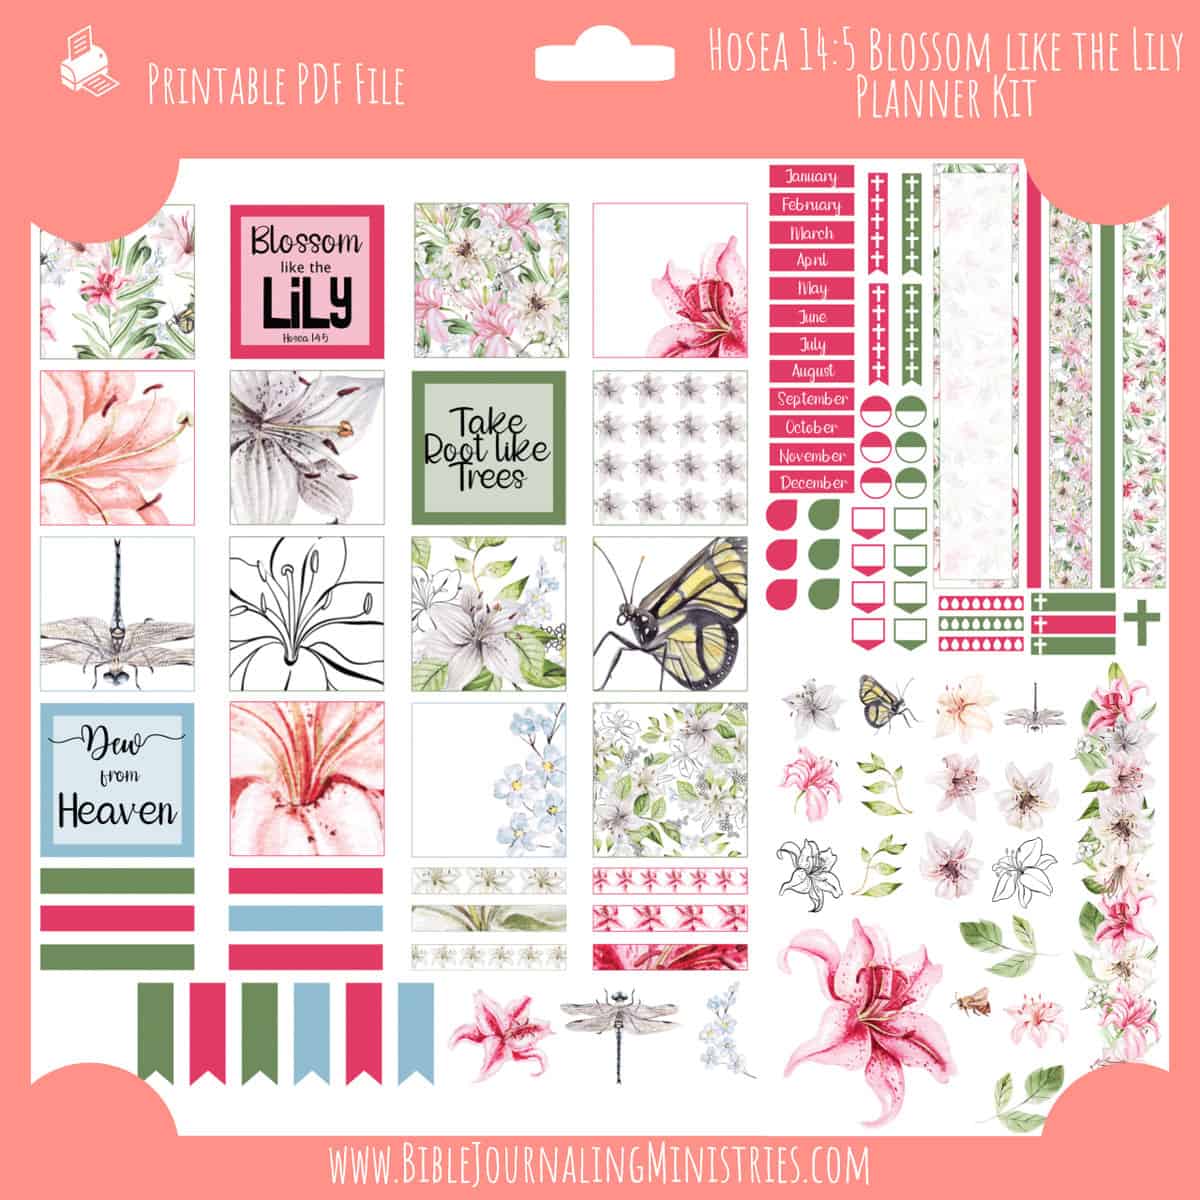 Hosea 14:5 - Blossom like the Lily Planner Kit